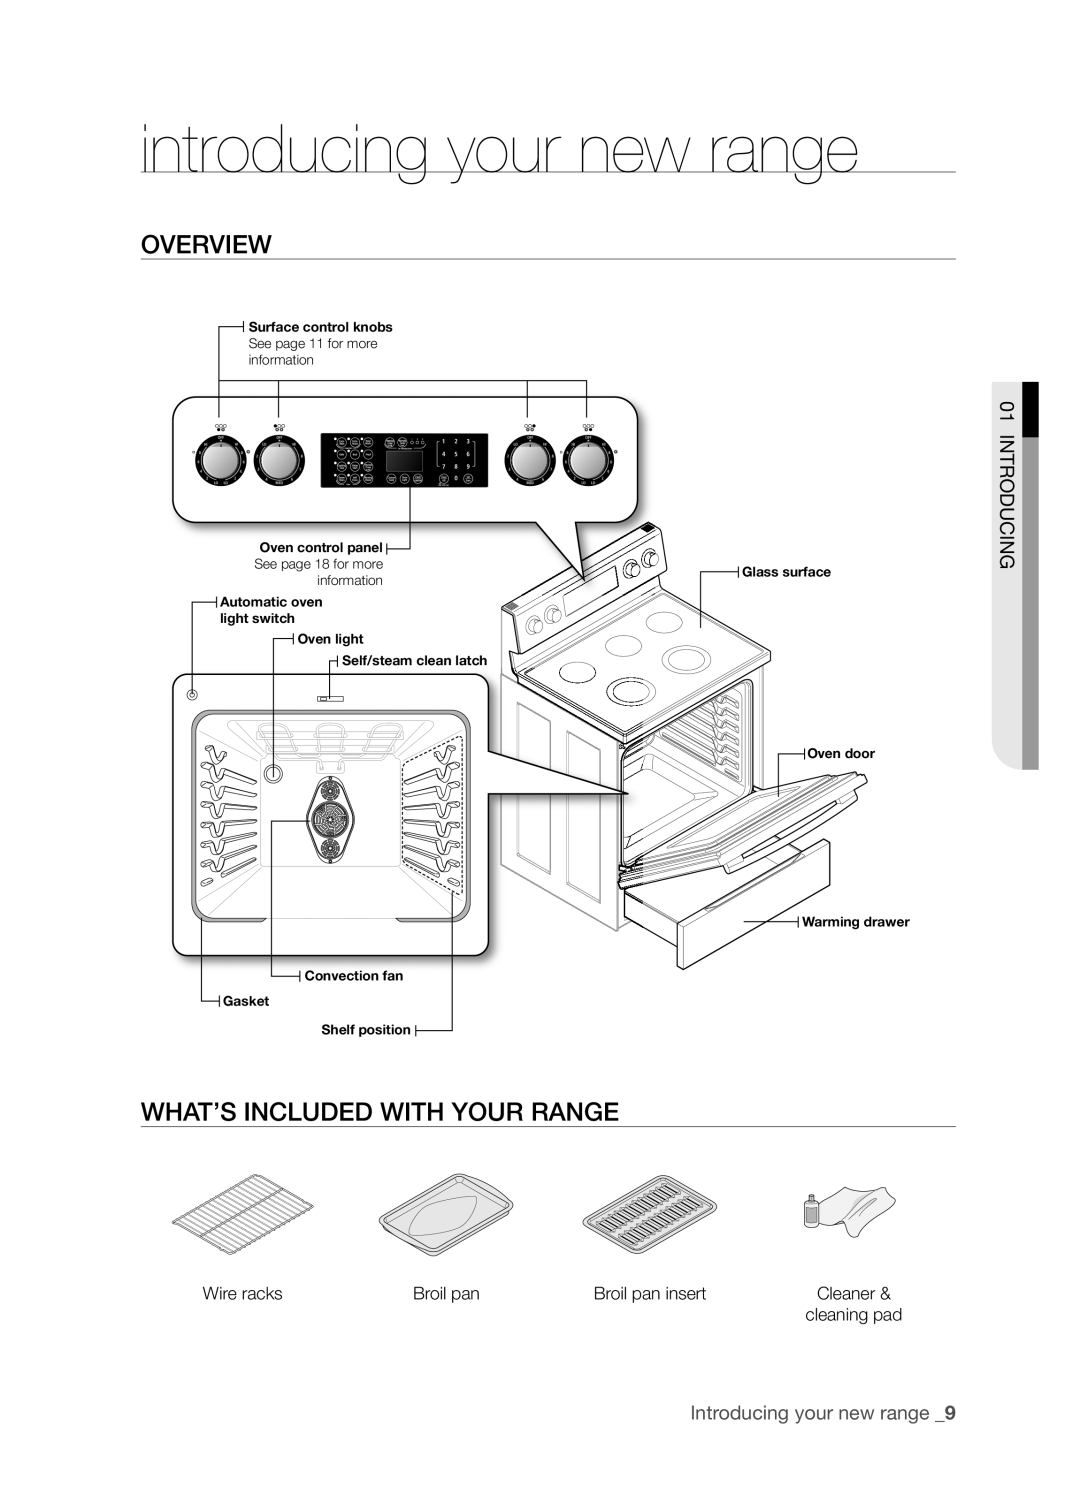 Samsung FTQ352IWX user manual introducing your new range, Overview, What’S Included With Your Range, Introducing 